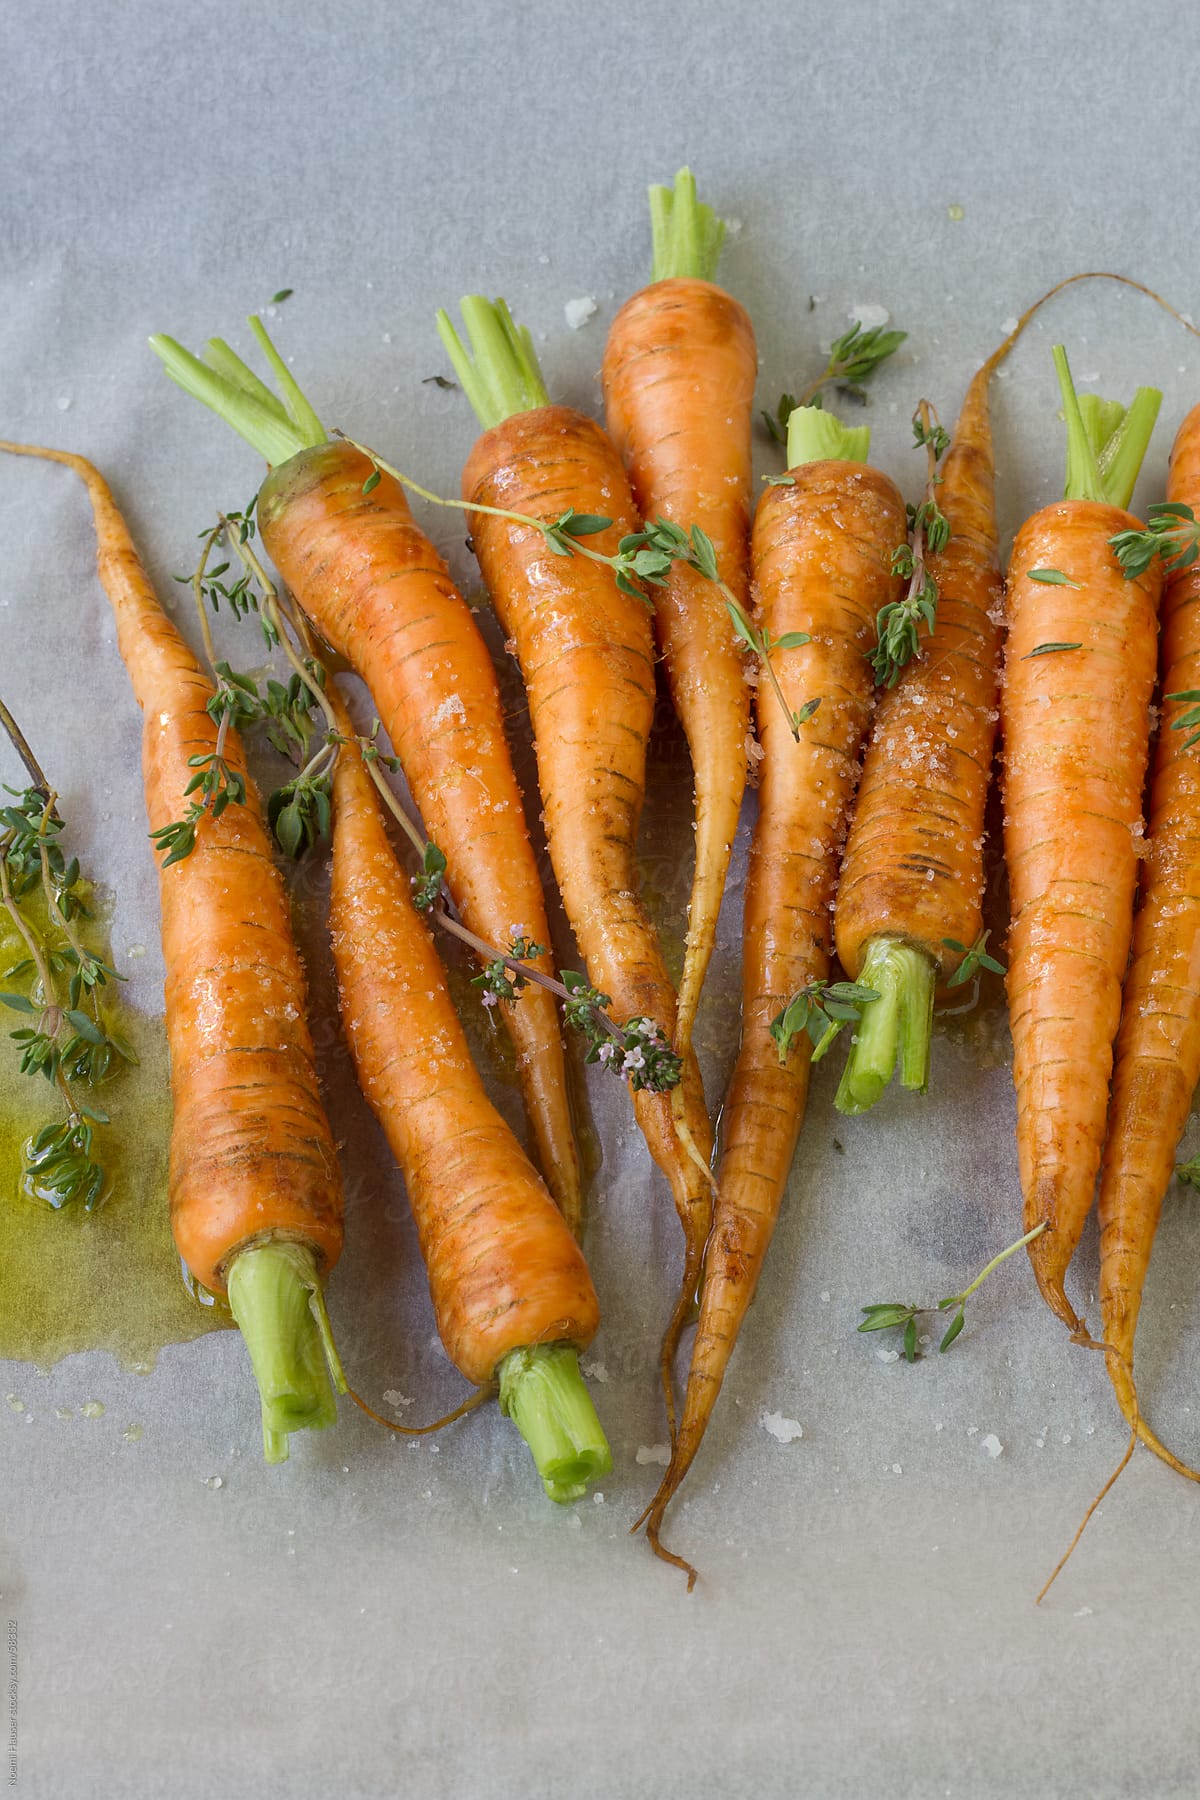 Carrots on baking paper